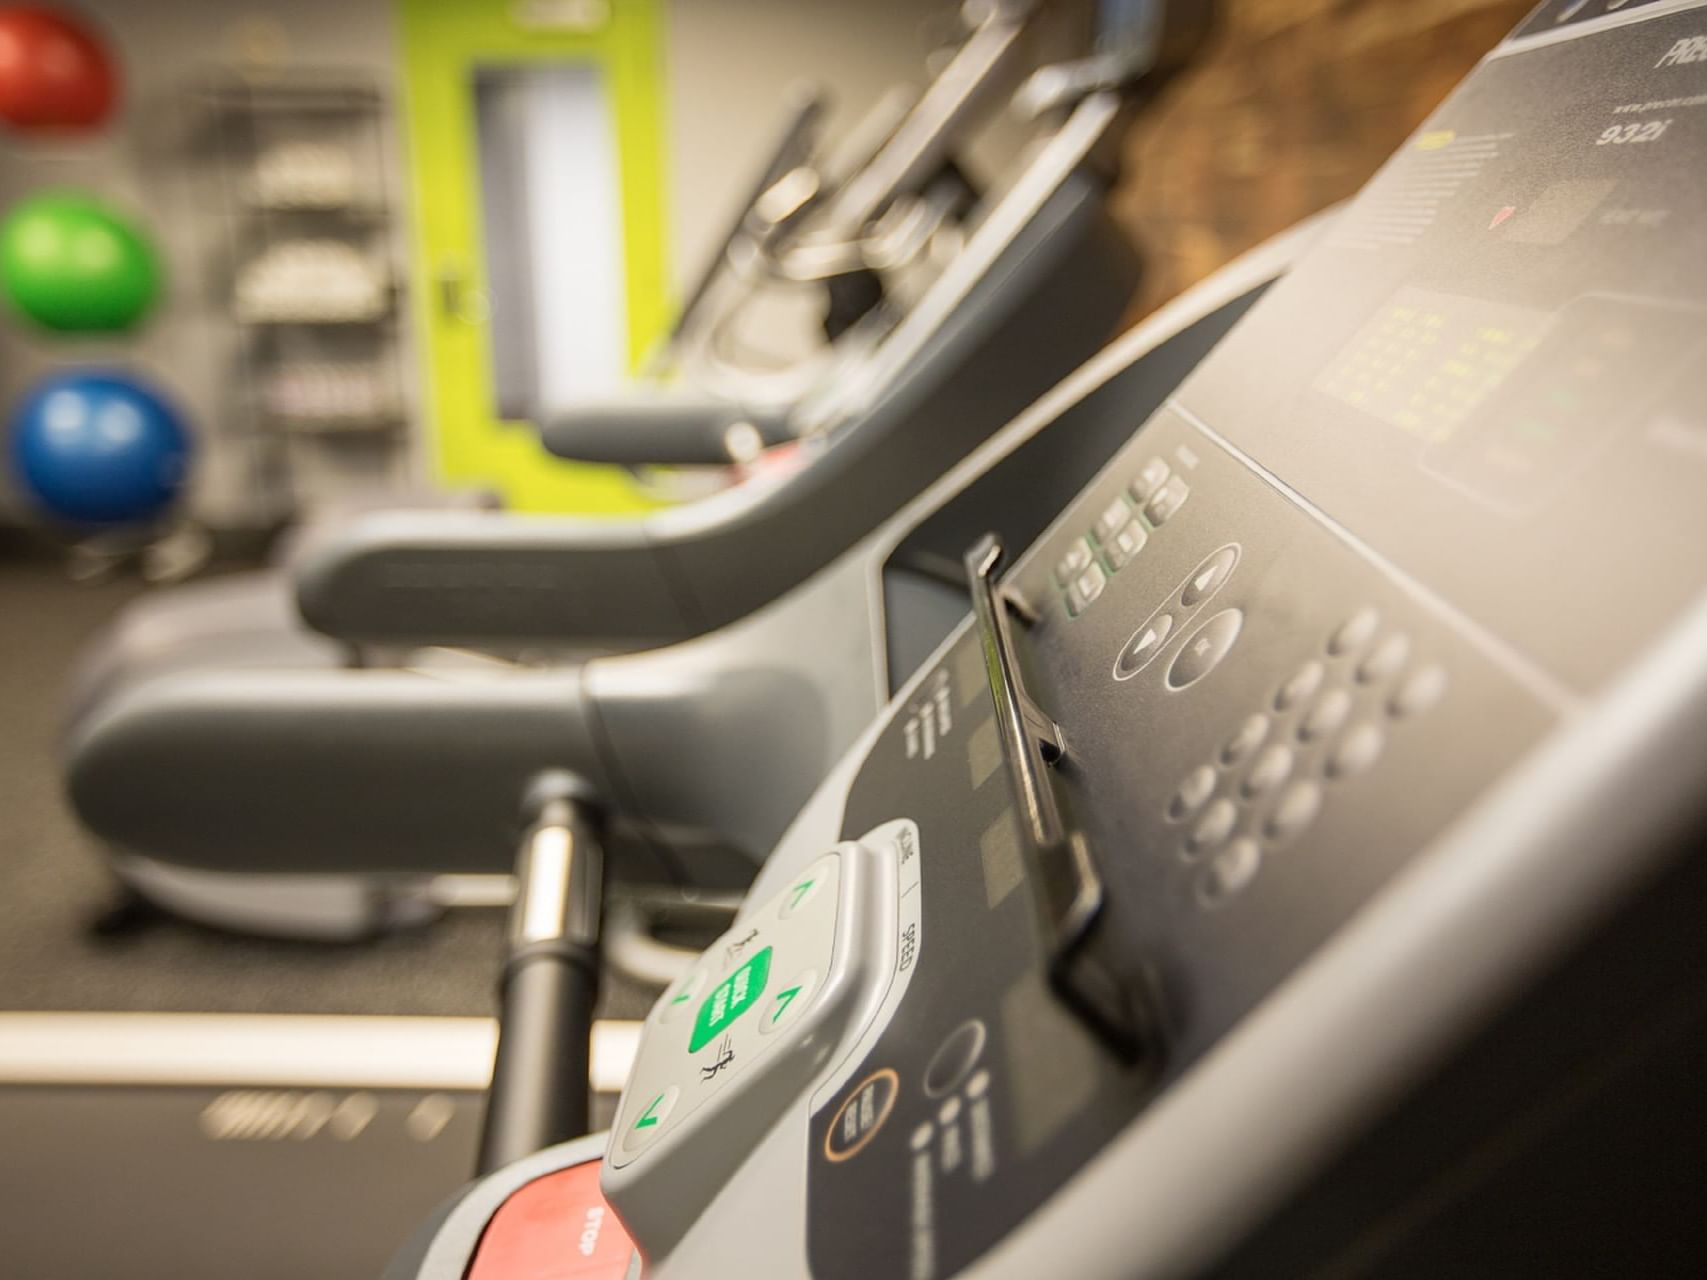 The fully-equipped fitness center at Paramount Hotel Seattle